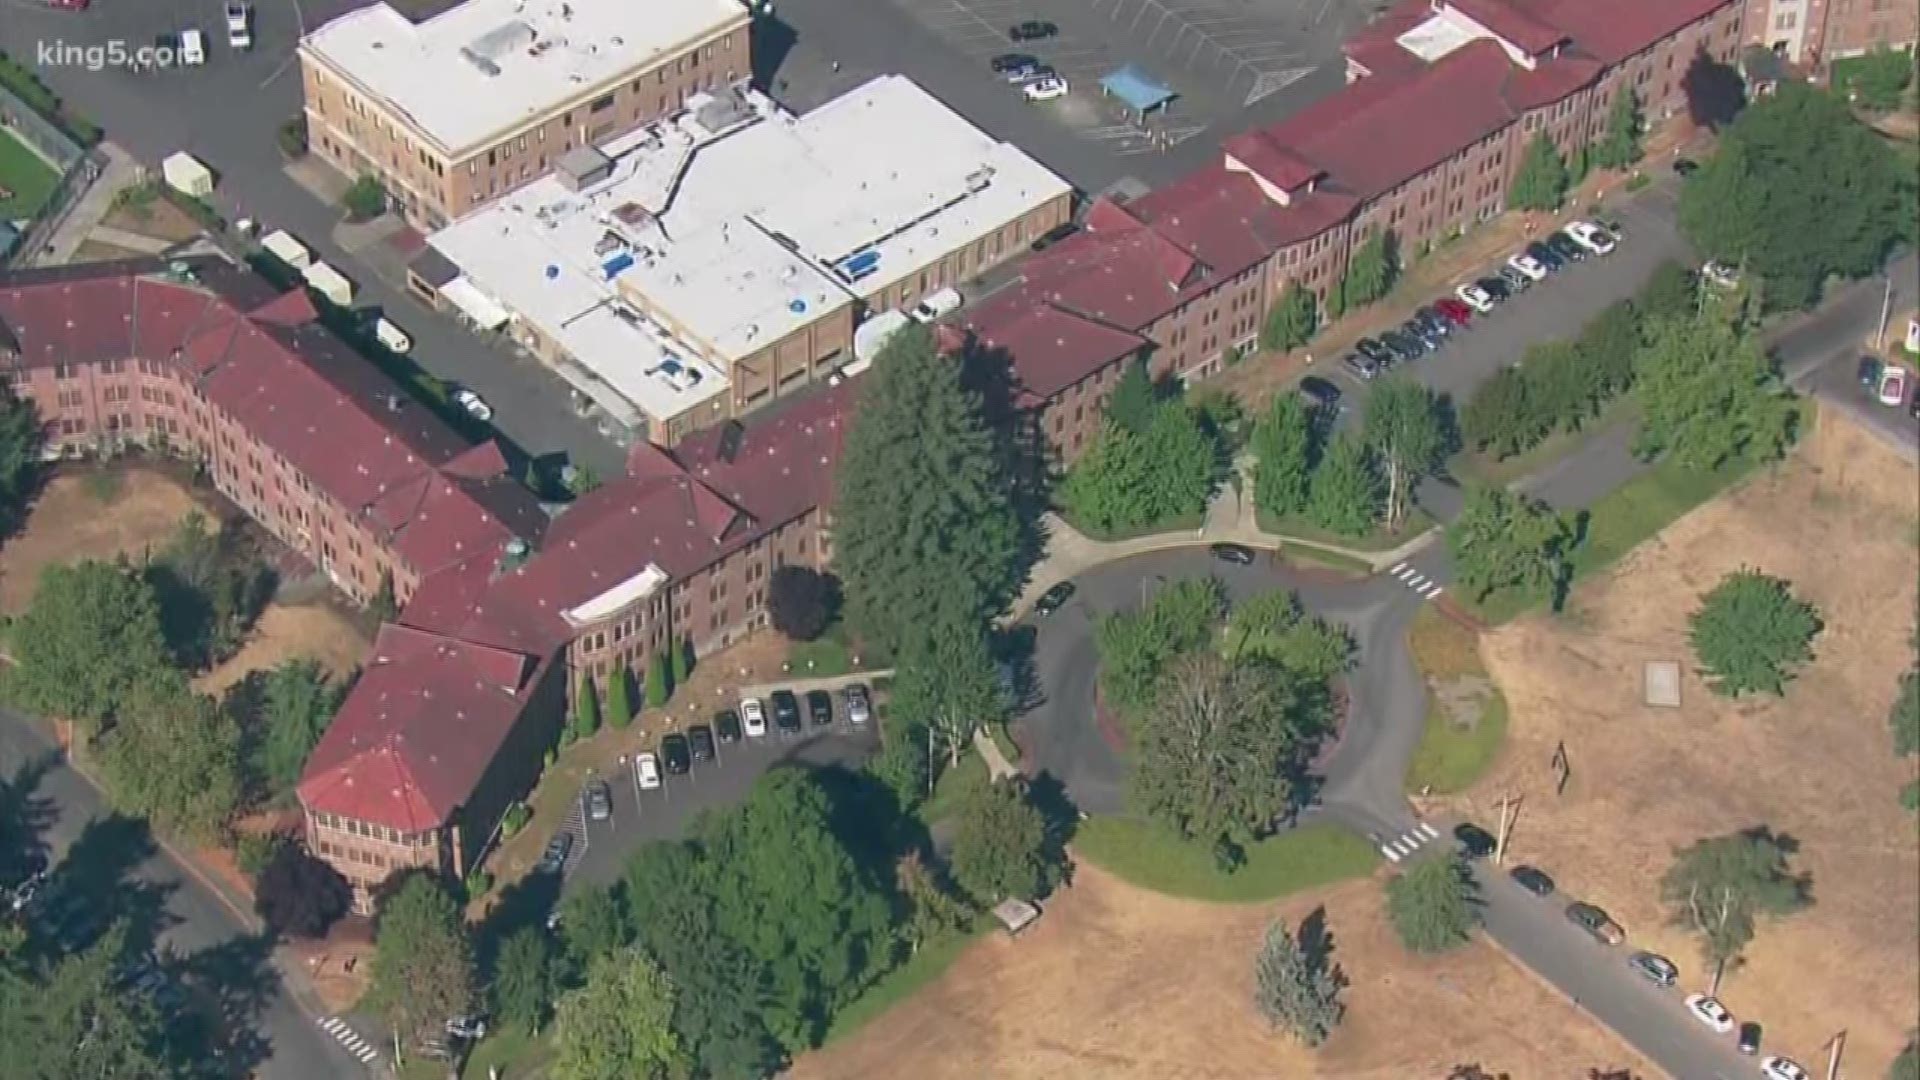 Despite "significant strides" at Western State Hospital, Washington state's largest psychiatric hospital lost its federal certification and $53 million in federal funds Monday after failing to achieve basic health and safety standards. KING 5's Natalie Br